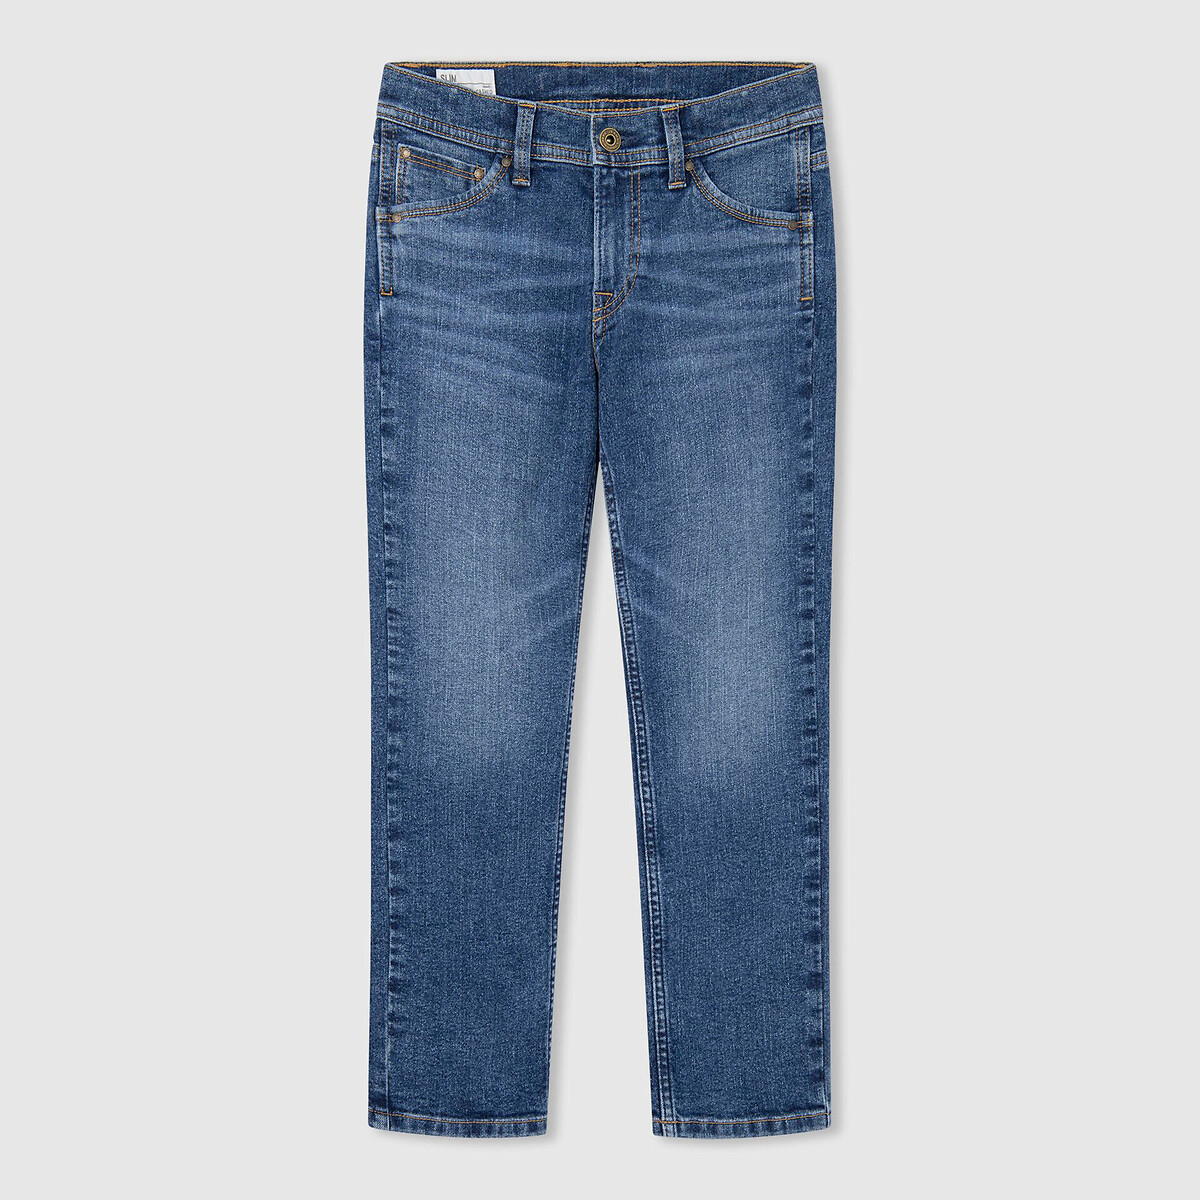 Image of Slim Fit Jeans in Mid Rise